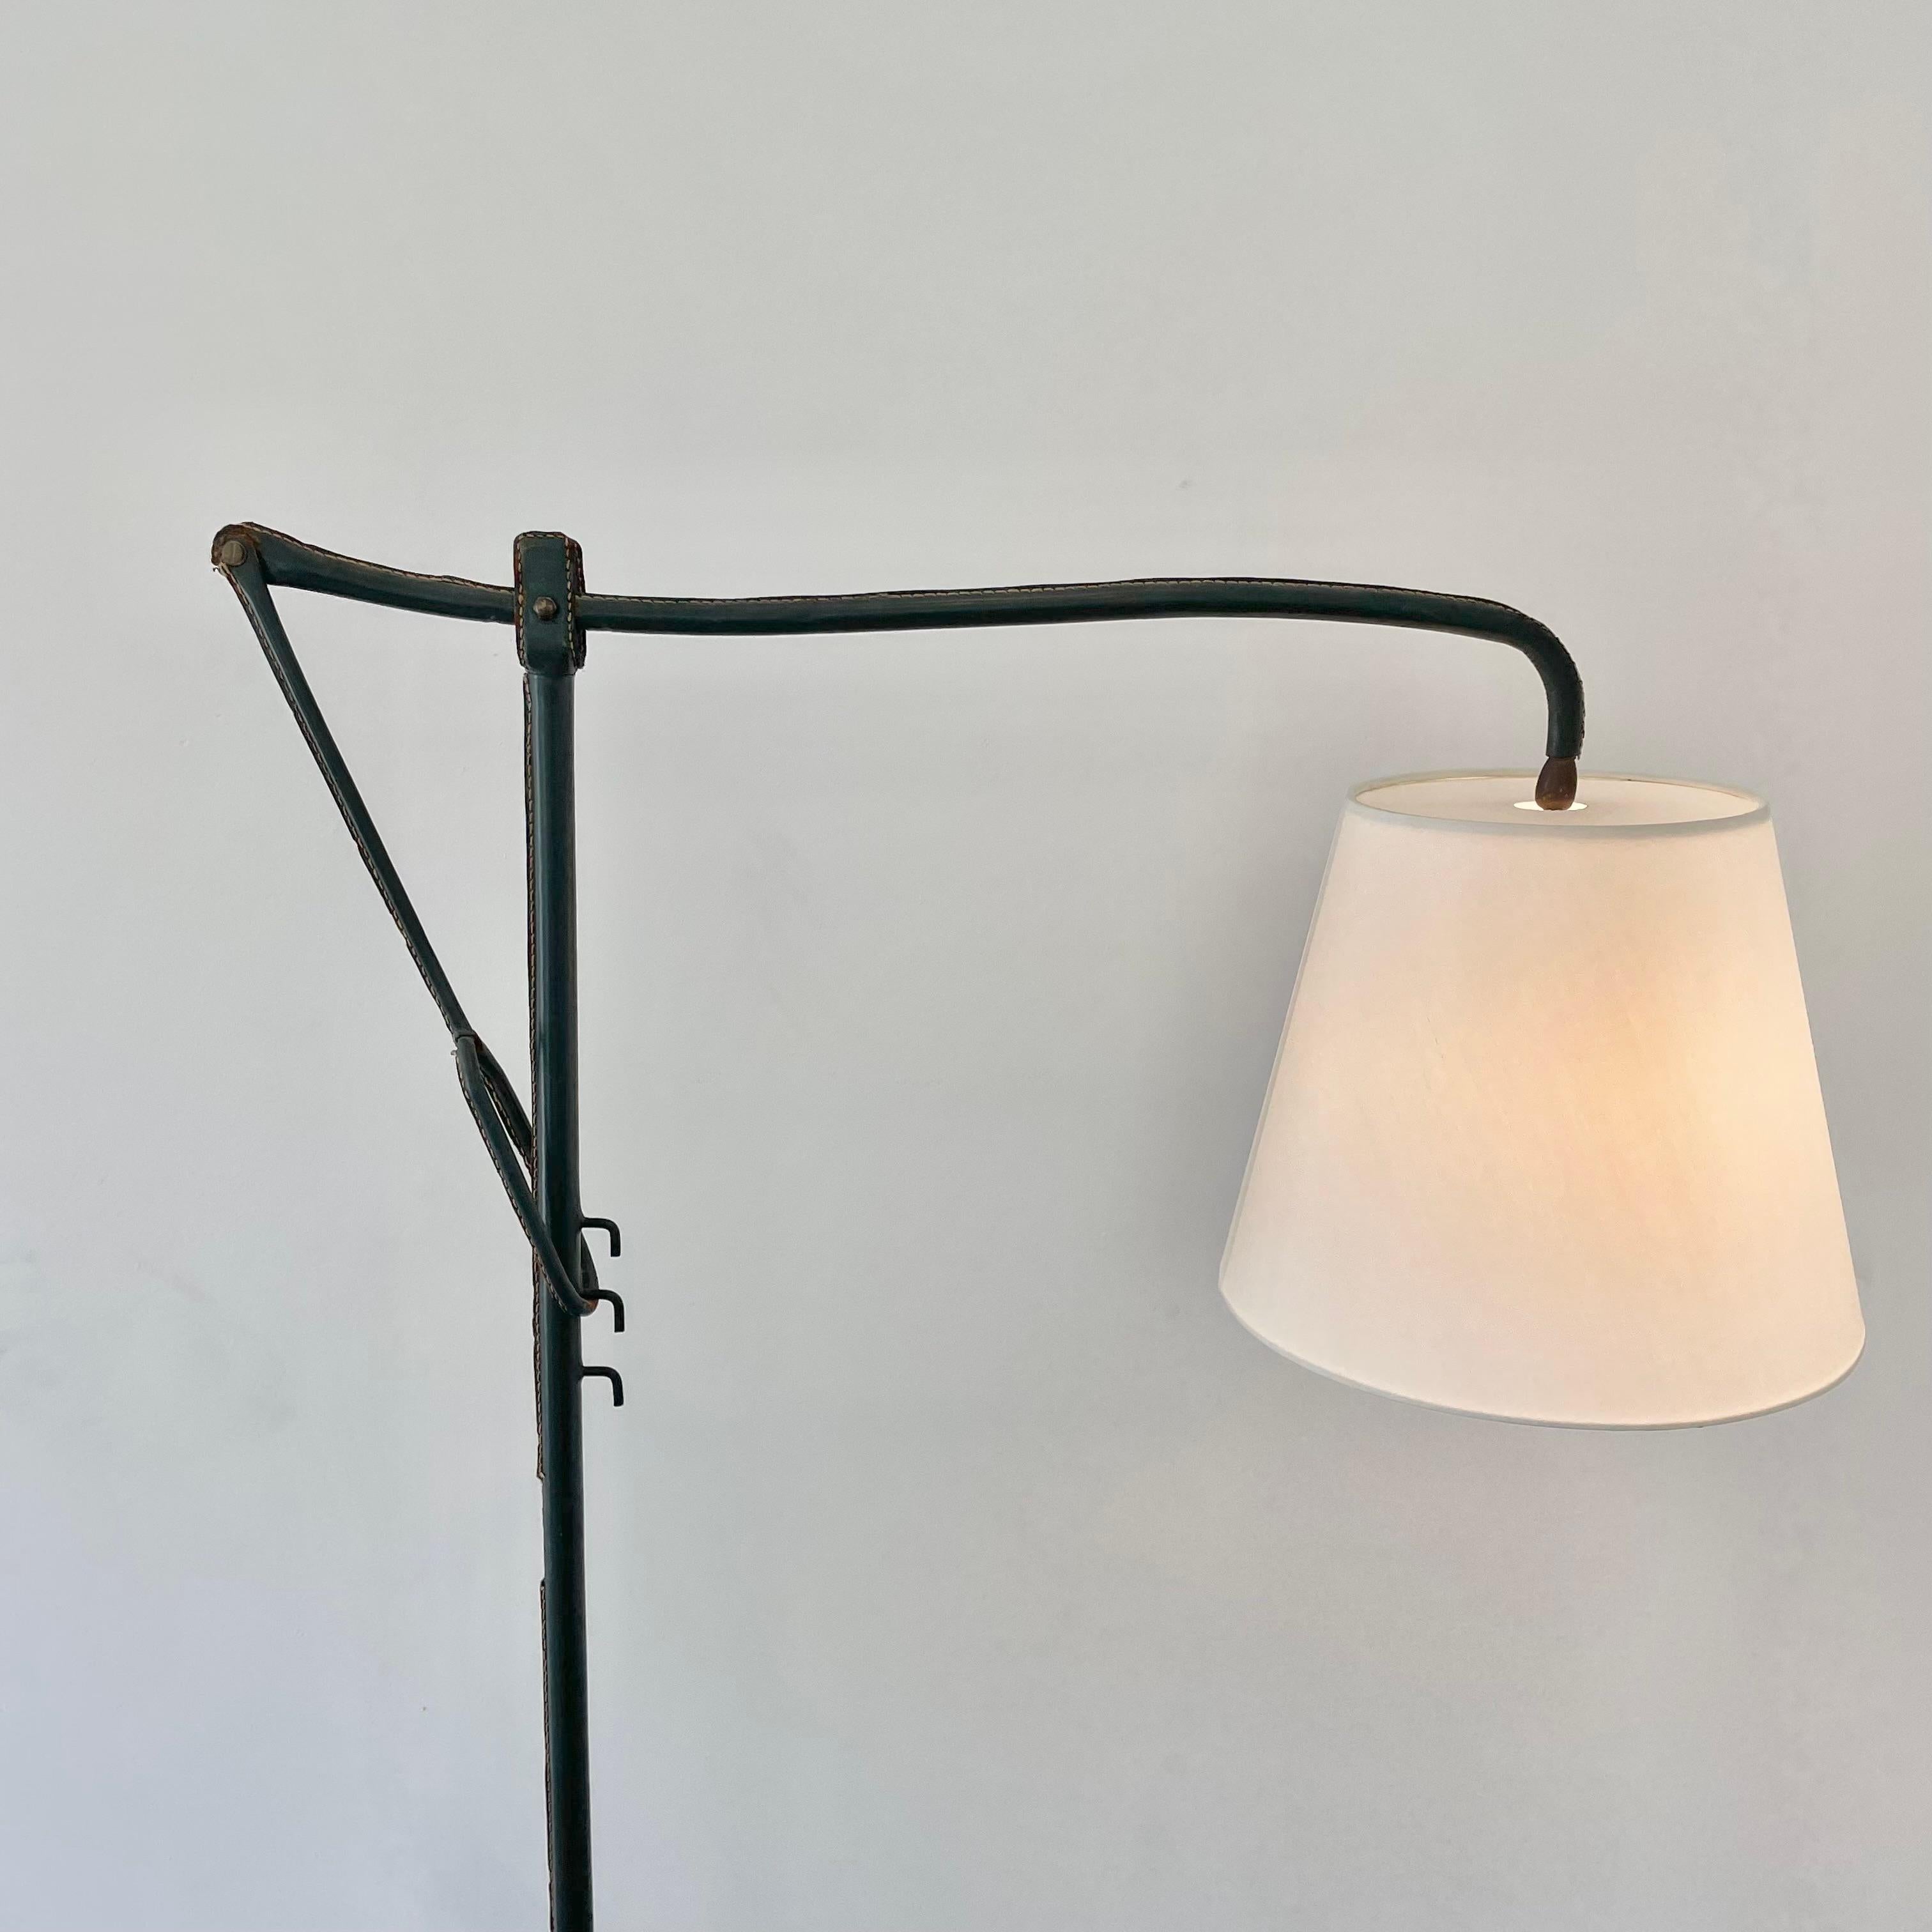 Mid-Century Modern Jacques Adnet Adjustable Green Leather Floor Lamp, 1950s France For Sale